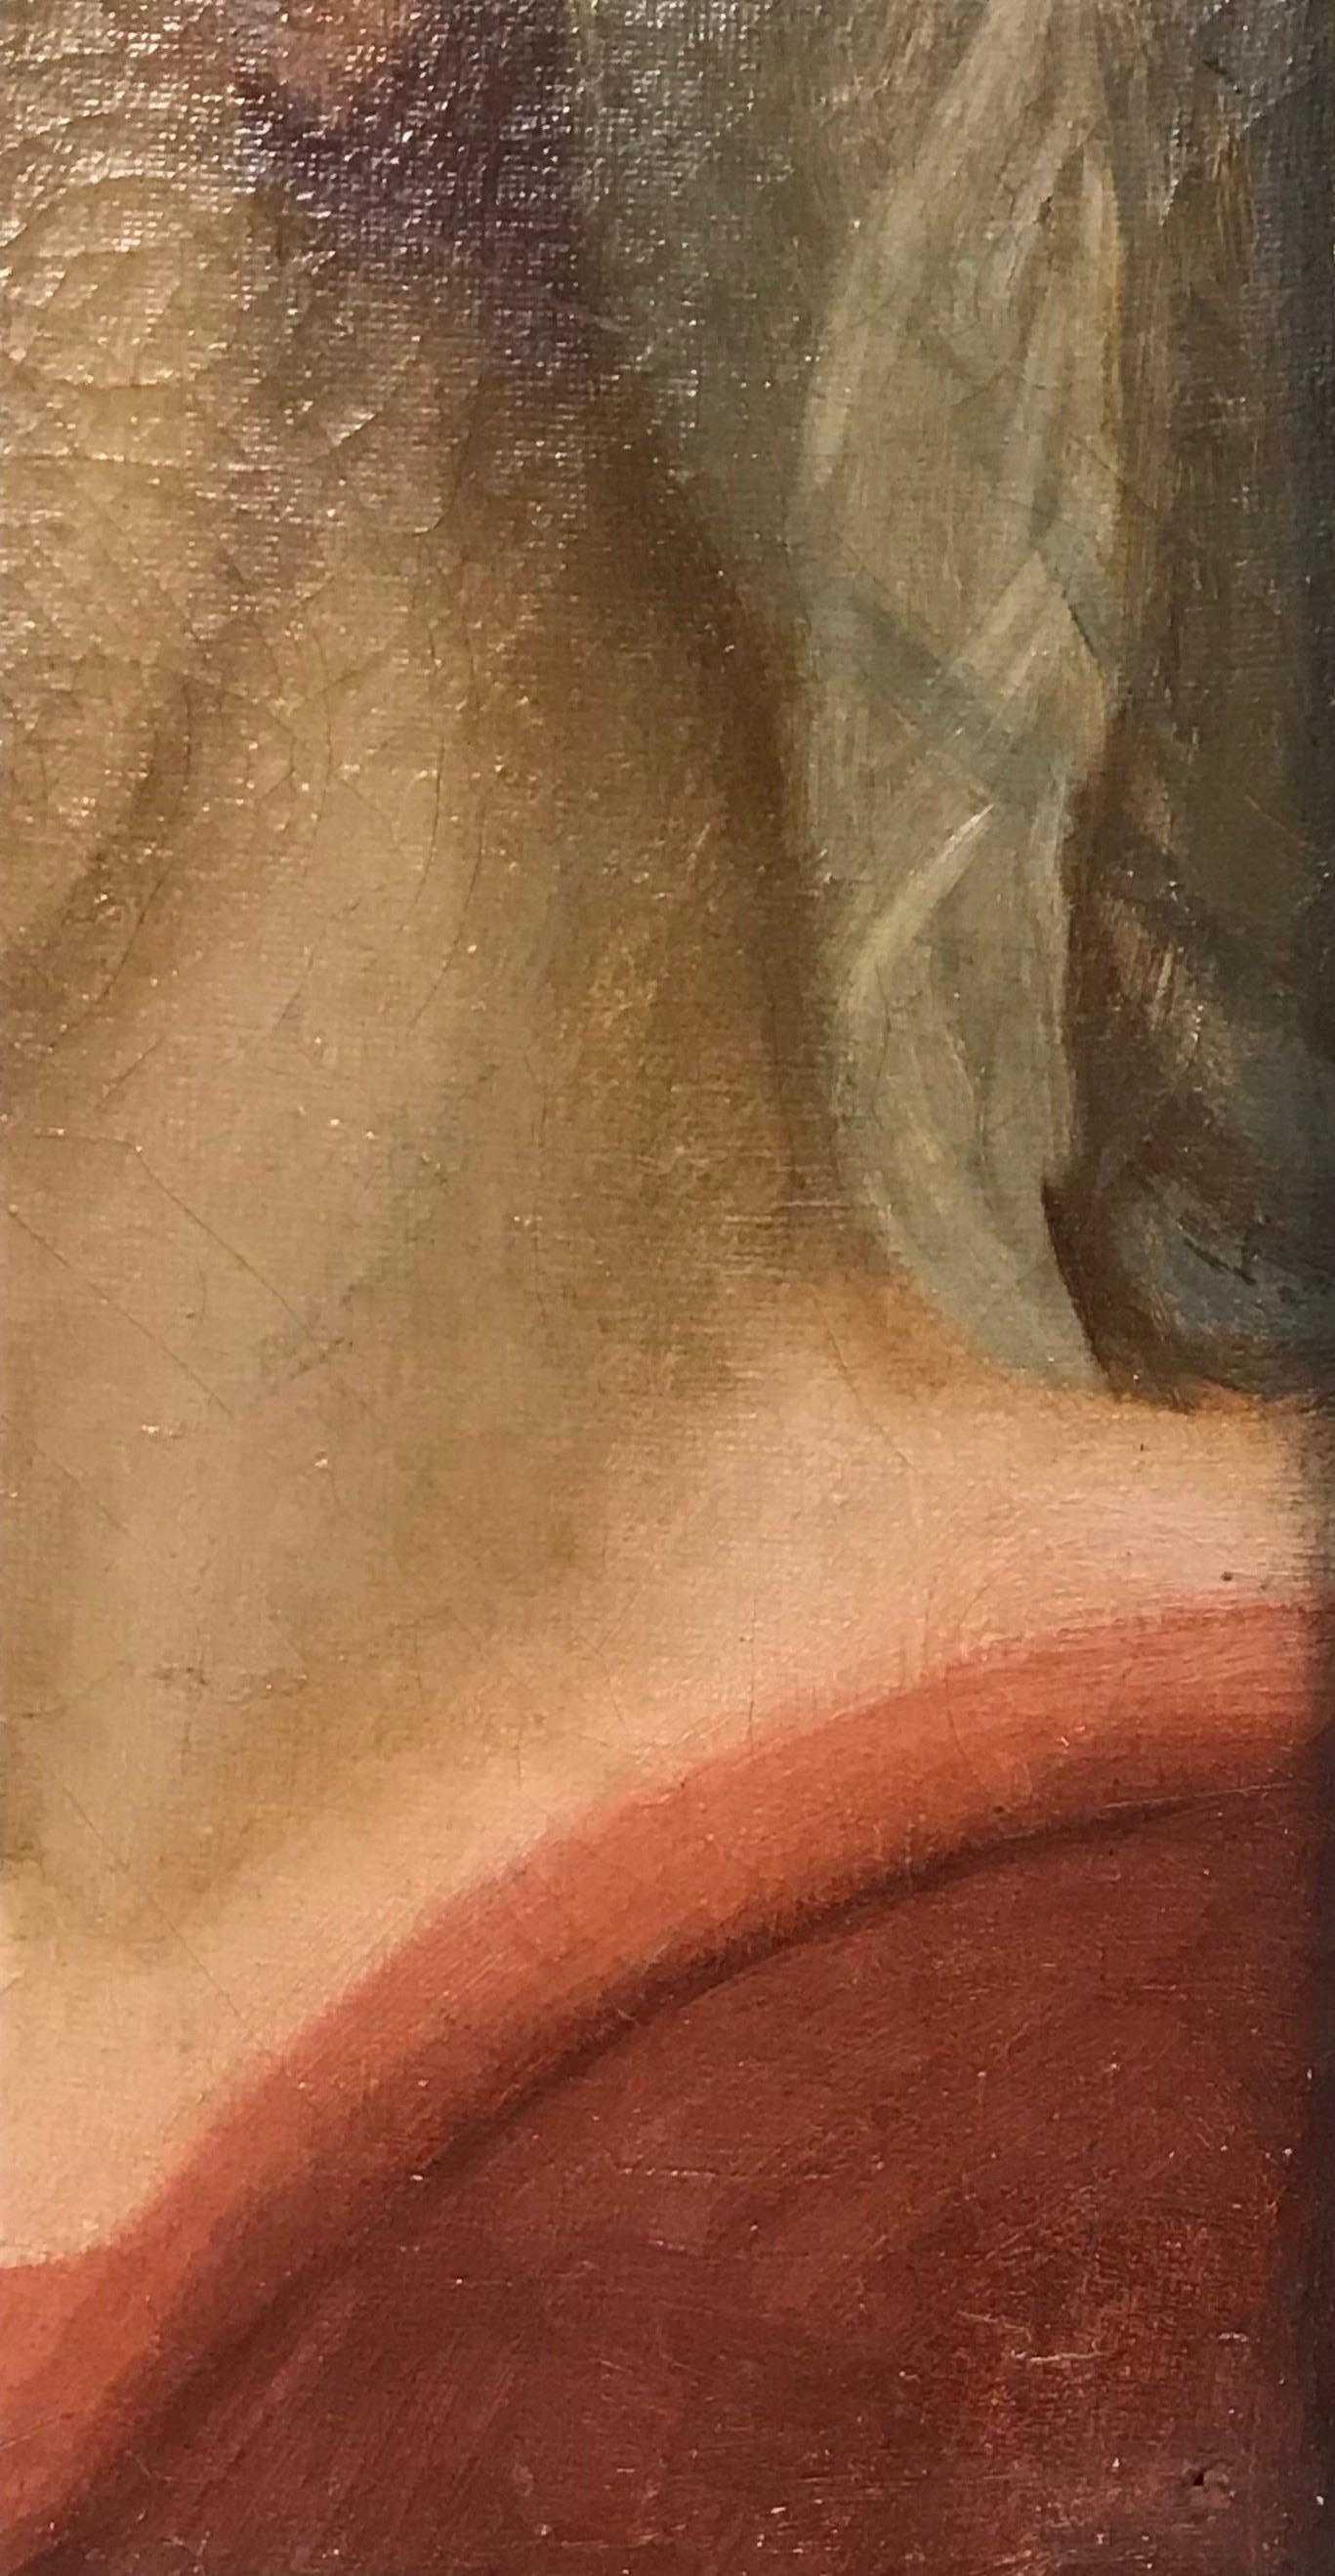 Artist/ School: Italian School, late 19th century

Title: Head & Shoulders portrait of the Madonna in Contemplation

Medium: oil on canvas, framed

Framed: 18 x 15 inches
Canvas: 14 x 10.5 inches

Provenance: private collection, Provence,